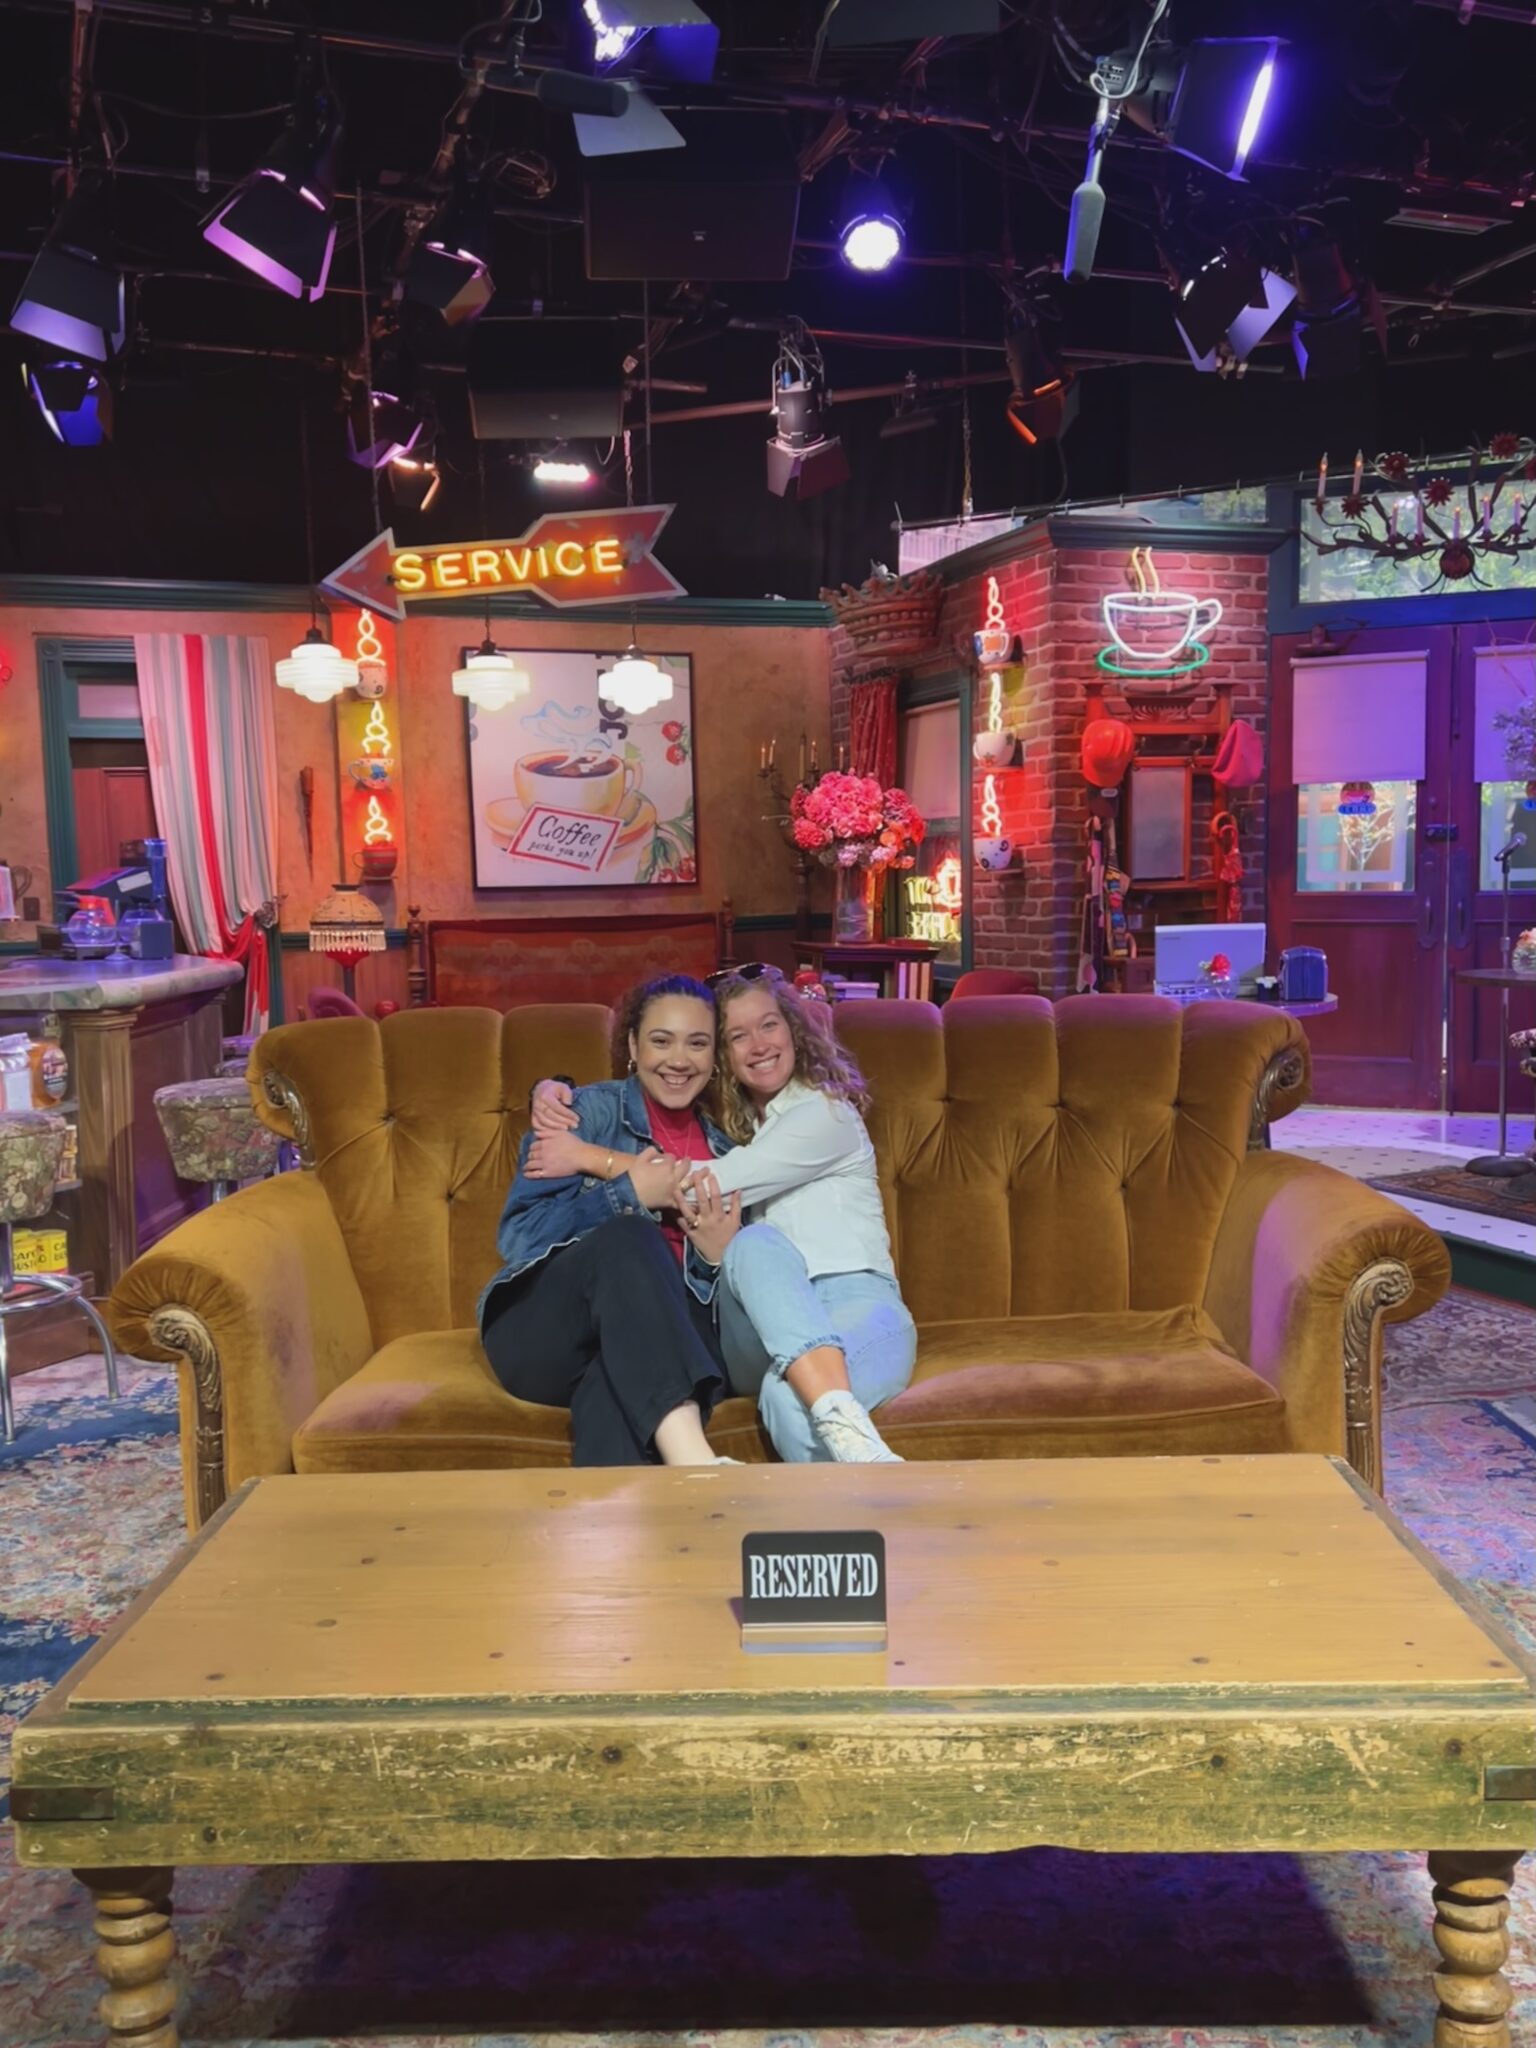 two people embrace each other while sitting on a couch on the set of the tv show "Friends"